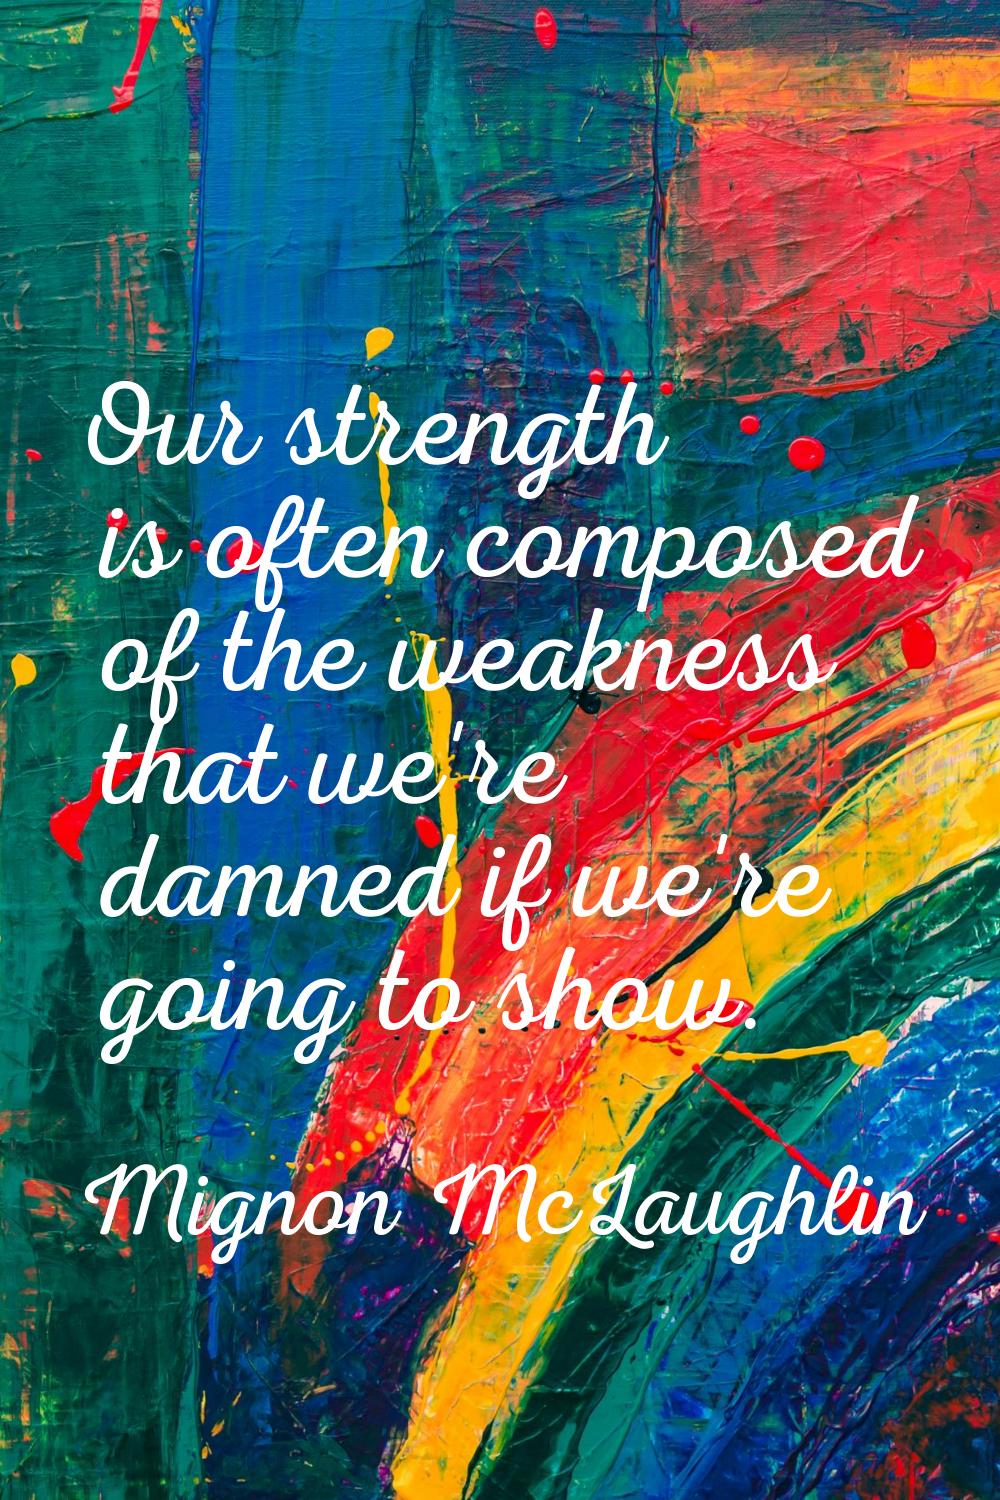 Our strength is often composed of the weakness that we're damned if we're going to show.